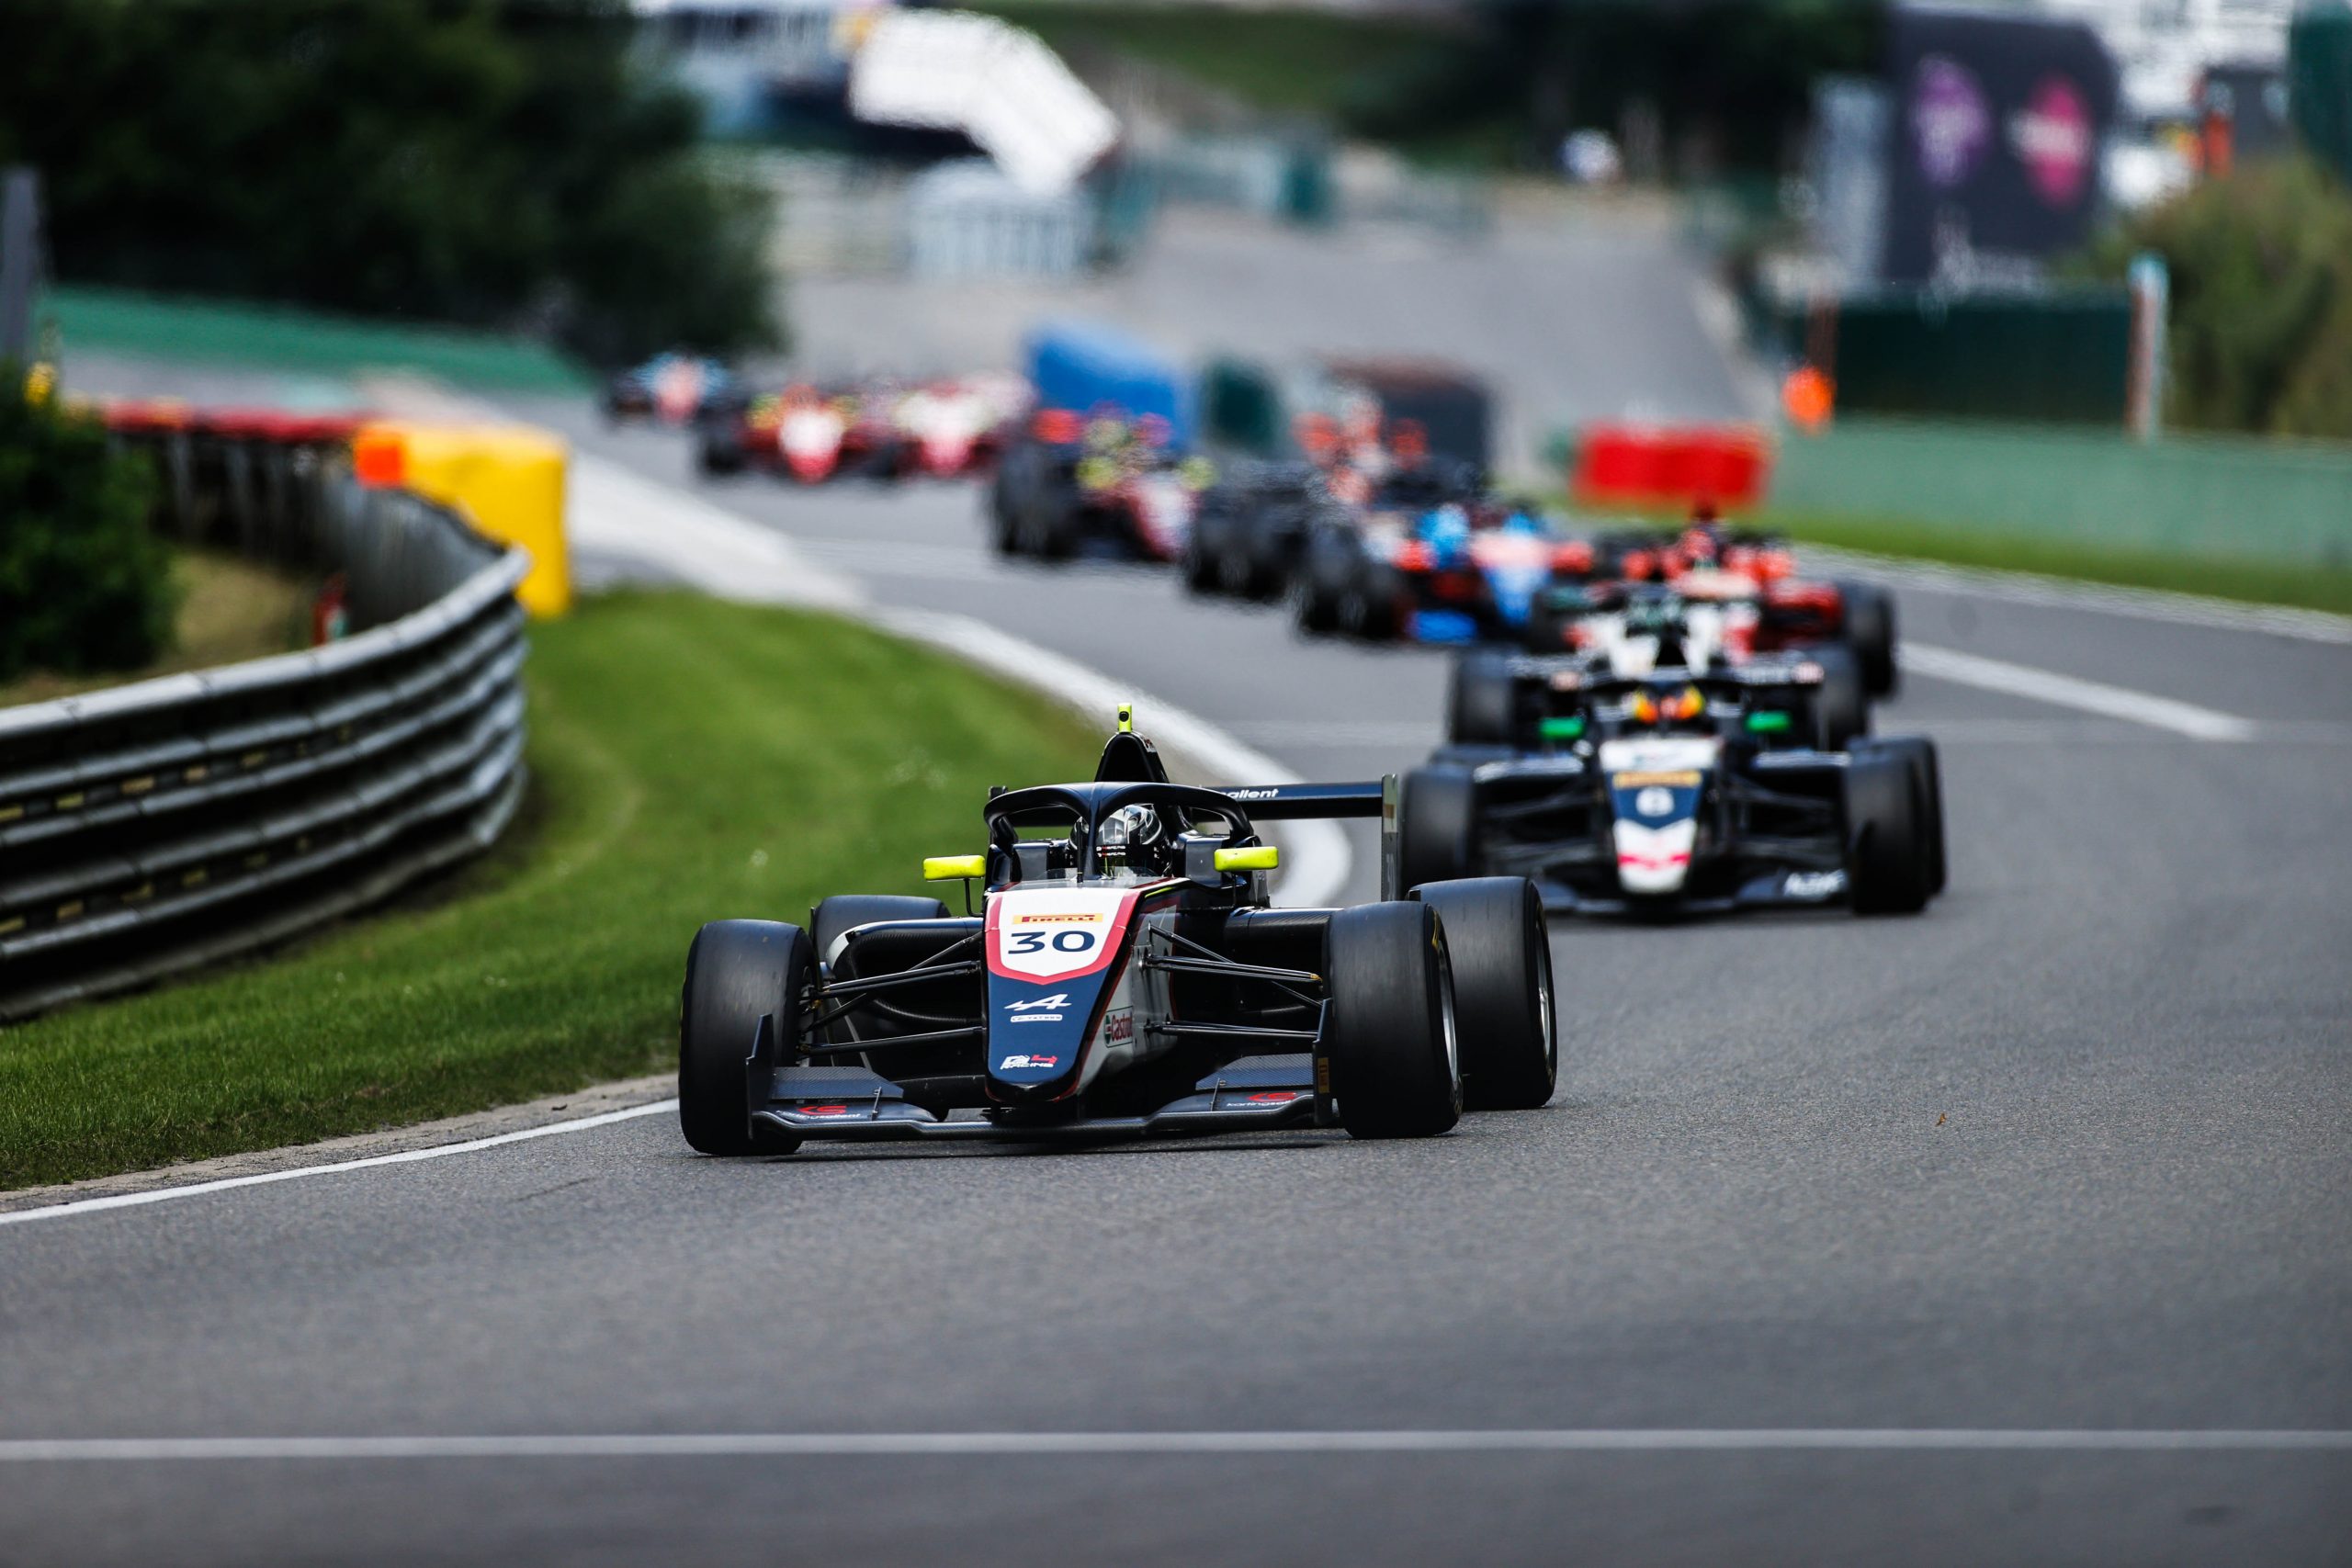 G4 Racing ends impressive weekend with top-5 at Spa